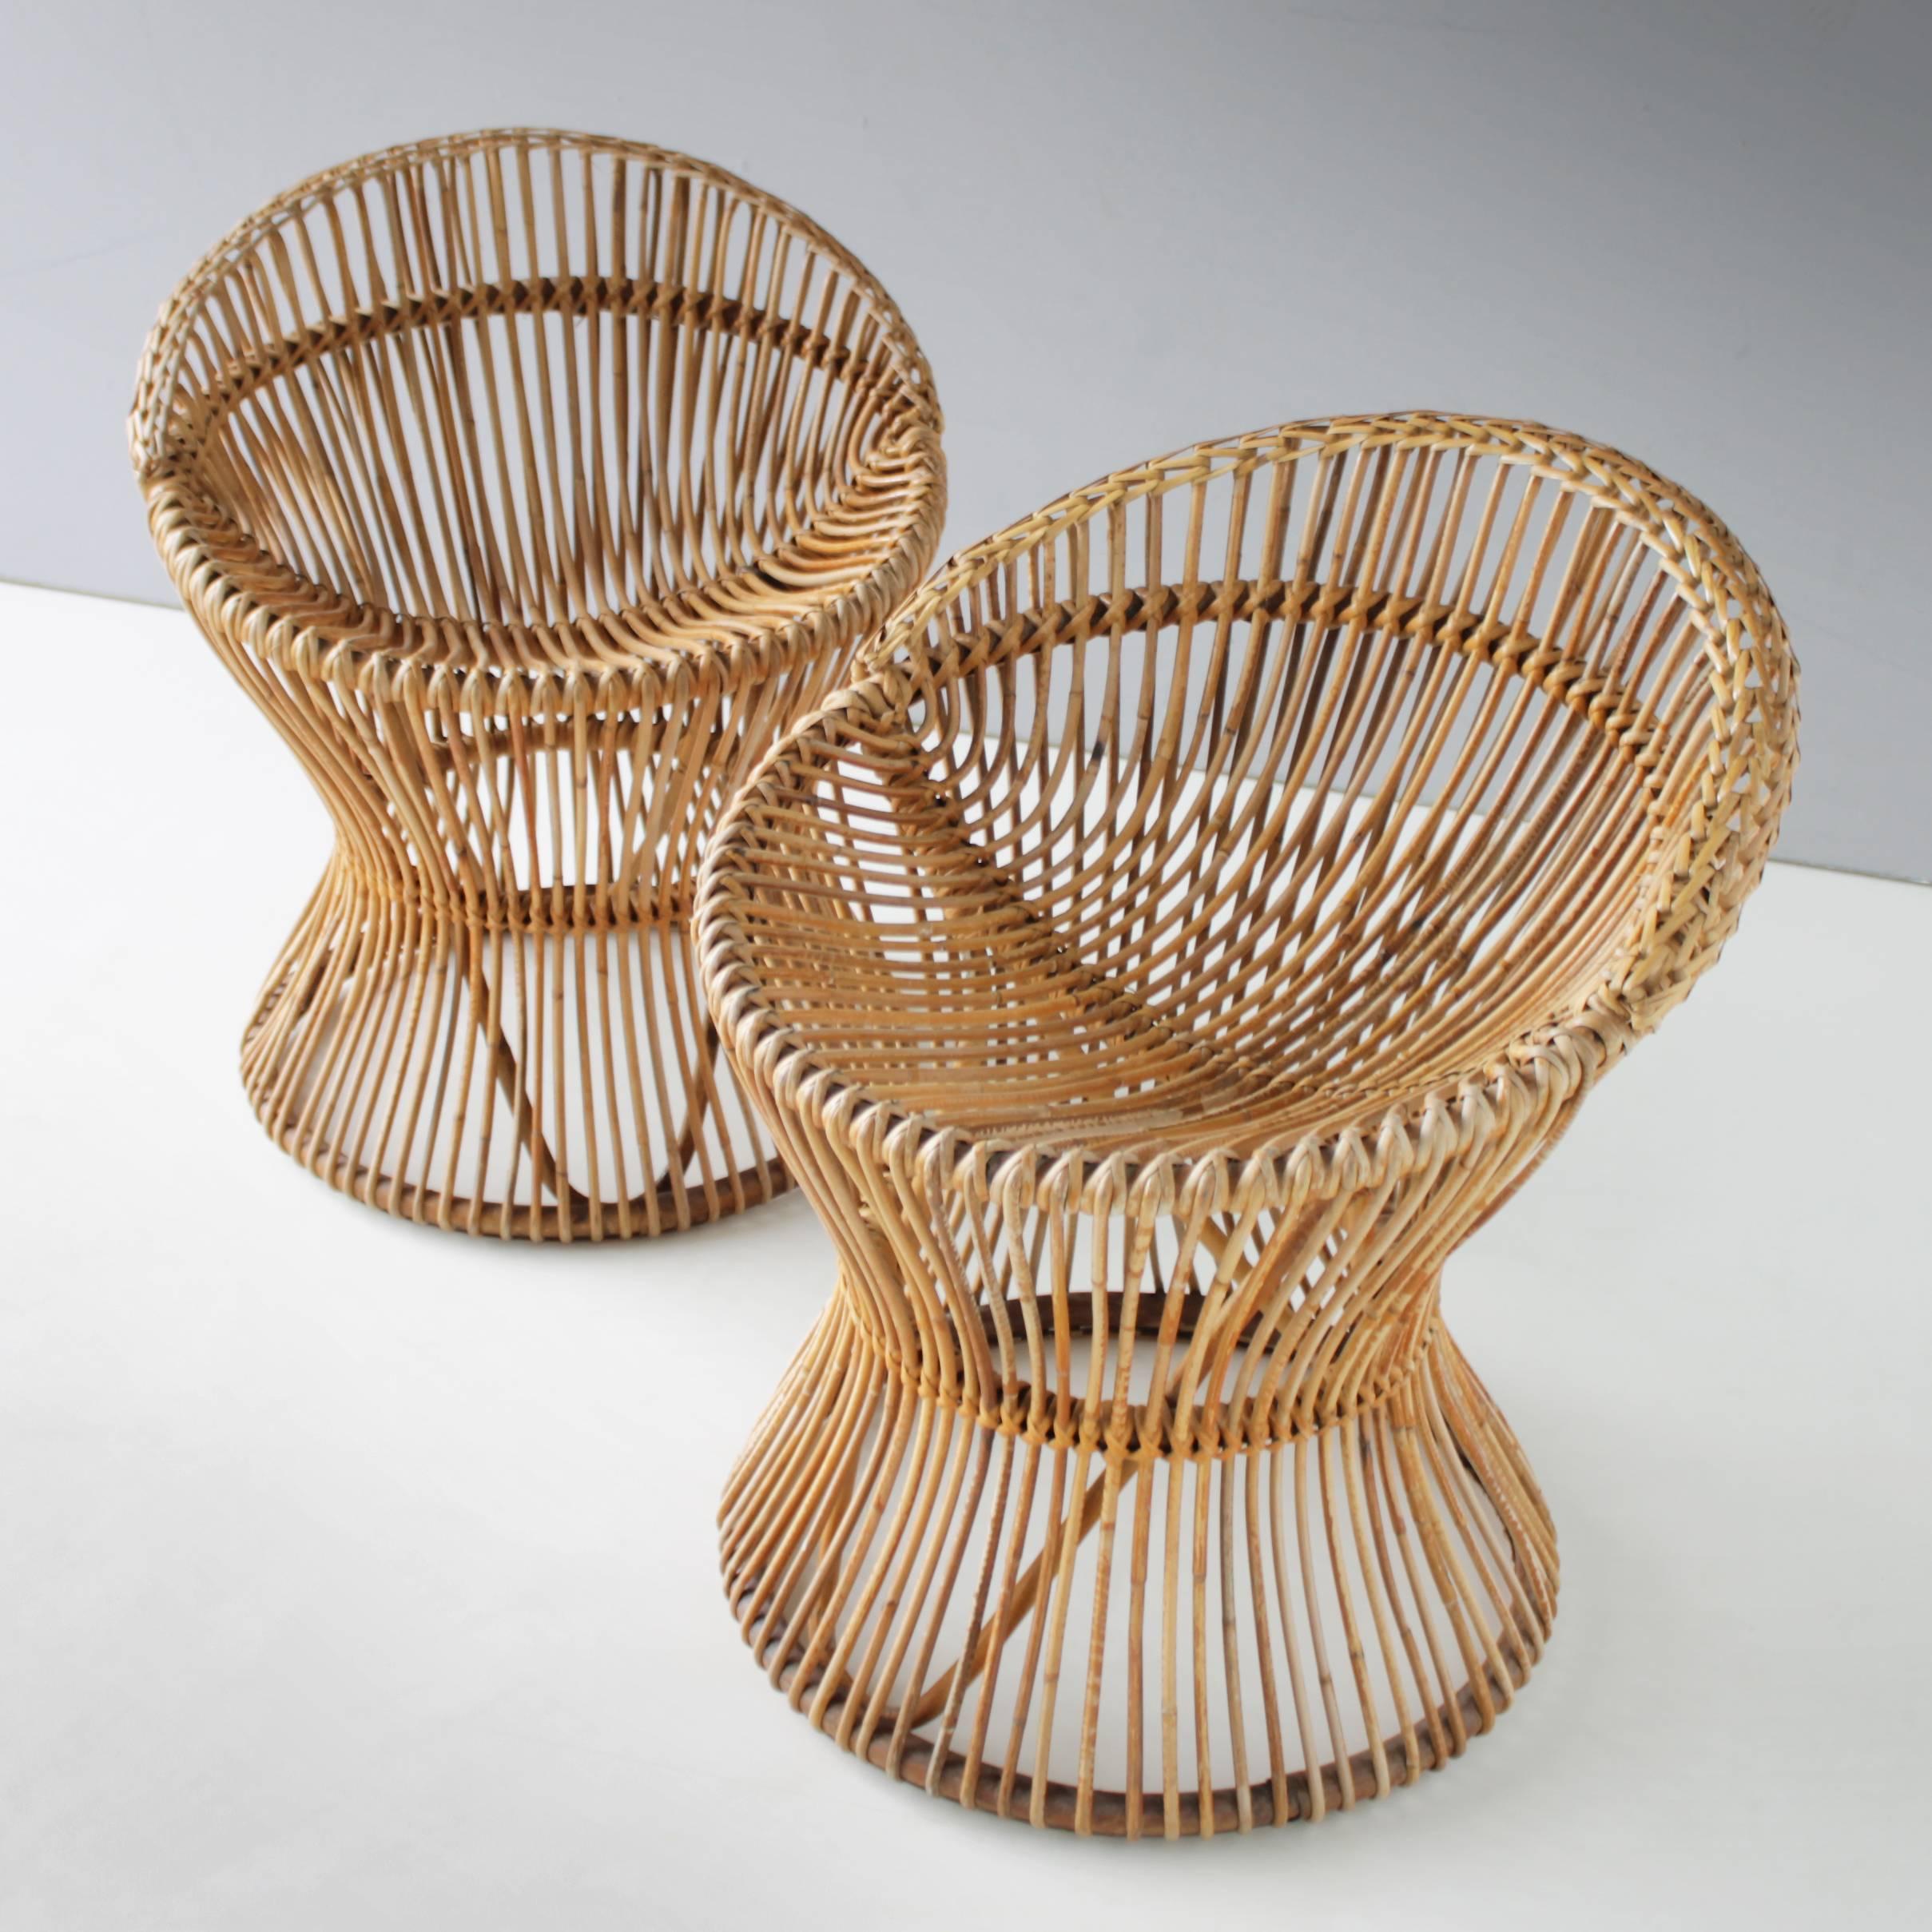 Pair of very rare rattan chairs attributed to Franco Albini for Bonacina Italy. Top condition. Measurements height: 23.6 in. (60 cm), width: 20.4 in. (52 cm), depth: 22.0 in. (56 cm) and seat height: 15.7 inches (40 cm).